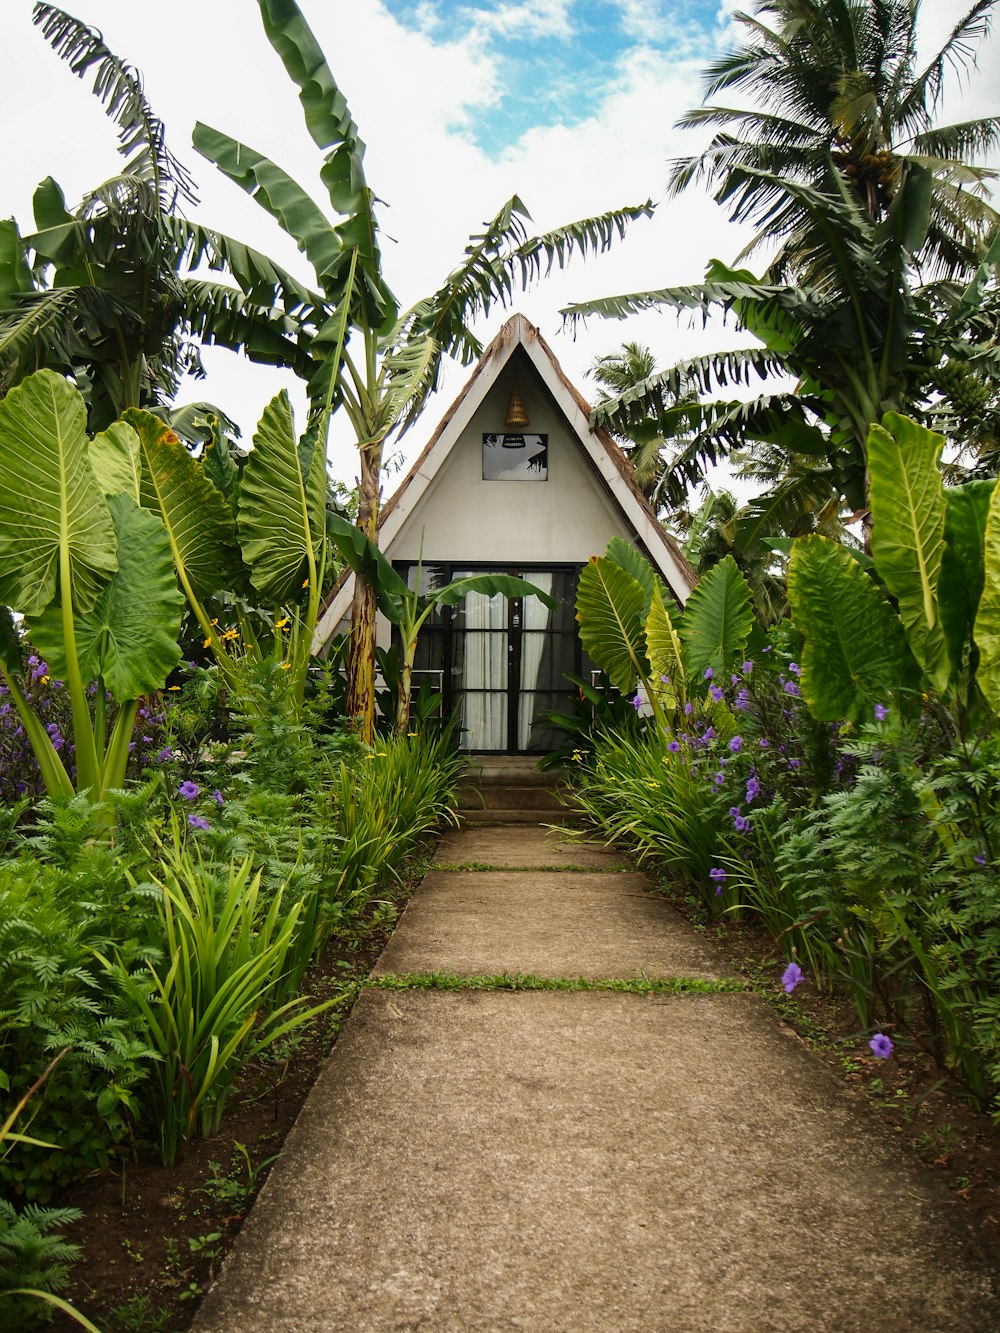 a house in the middle of a tropical garden